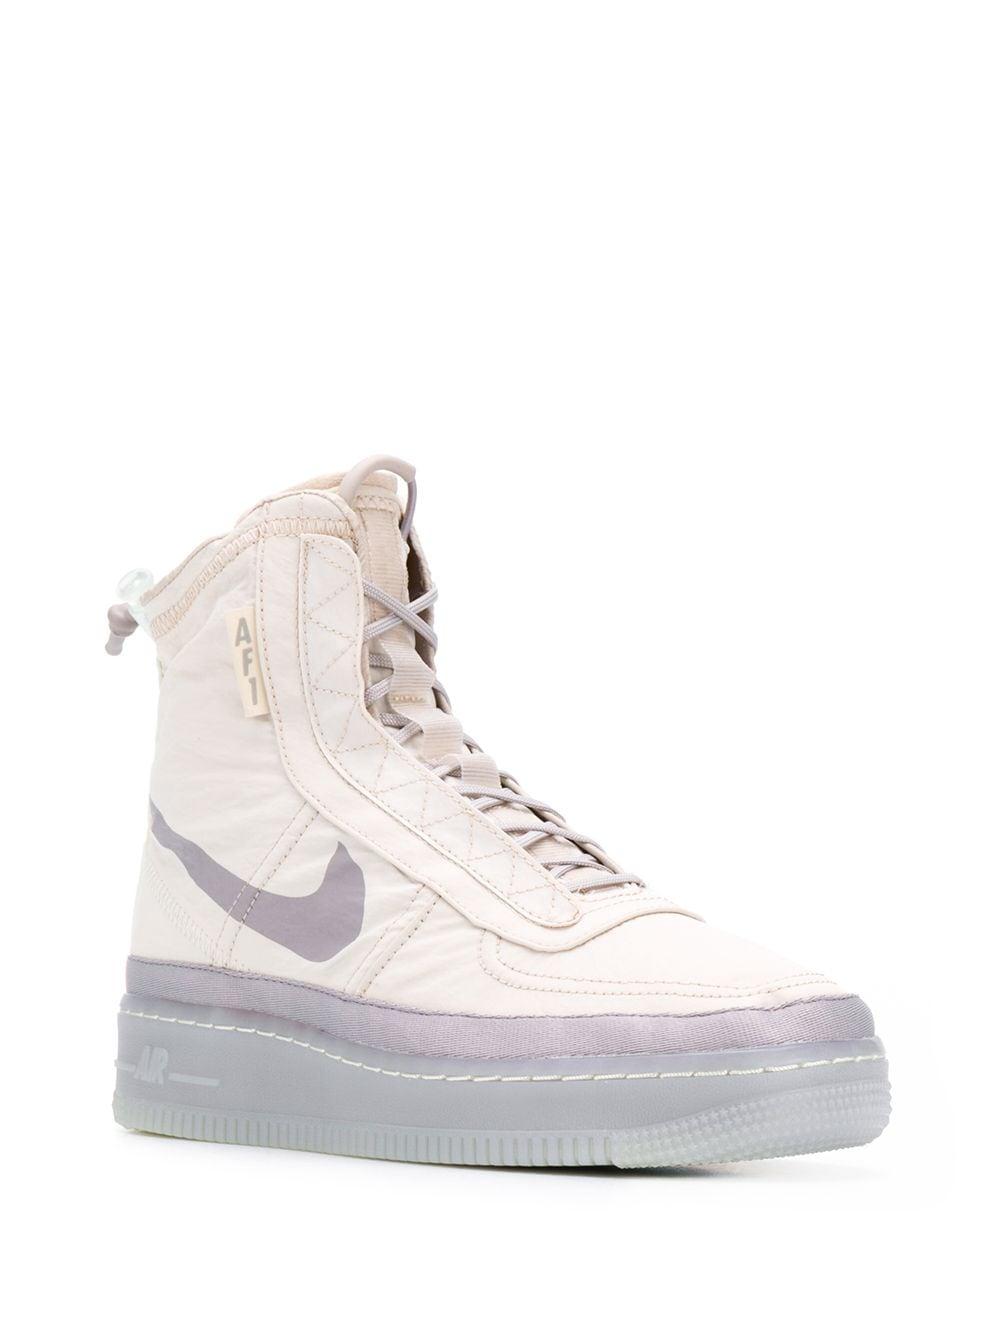 Nike Air Force 1 Shell High-top Sneakers in White | Lyst